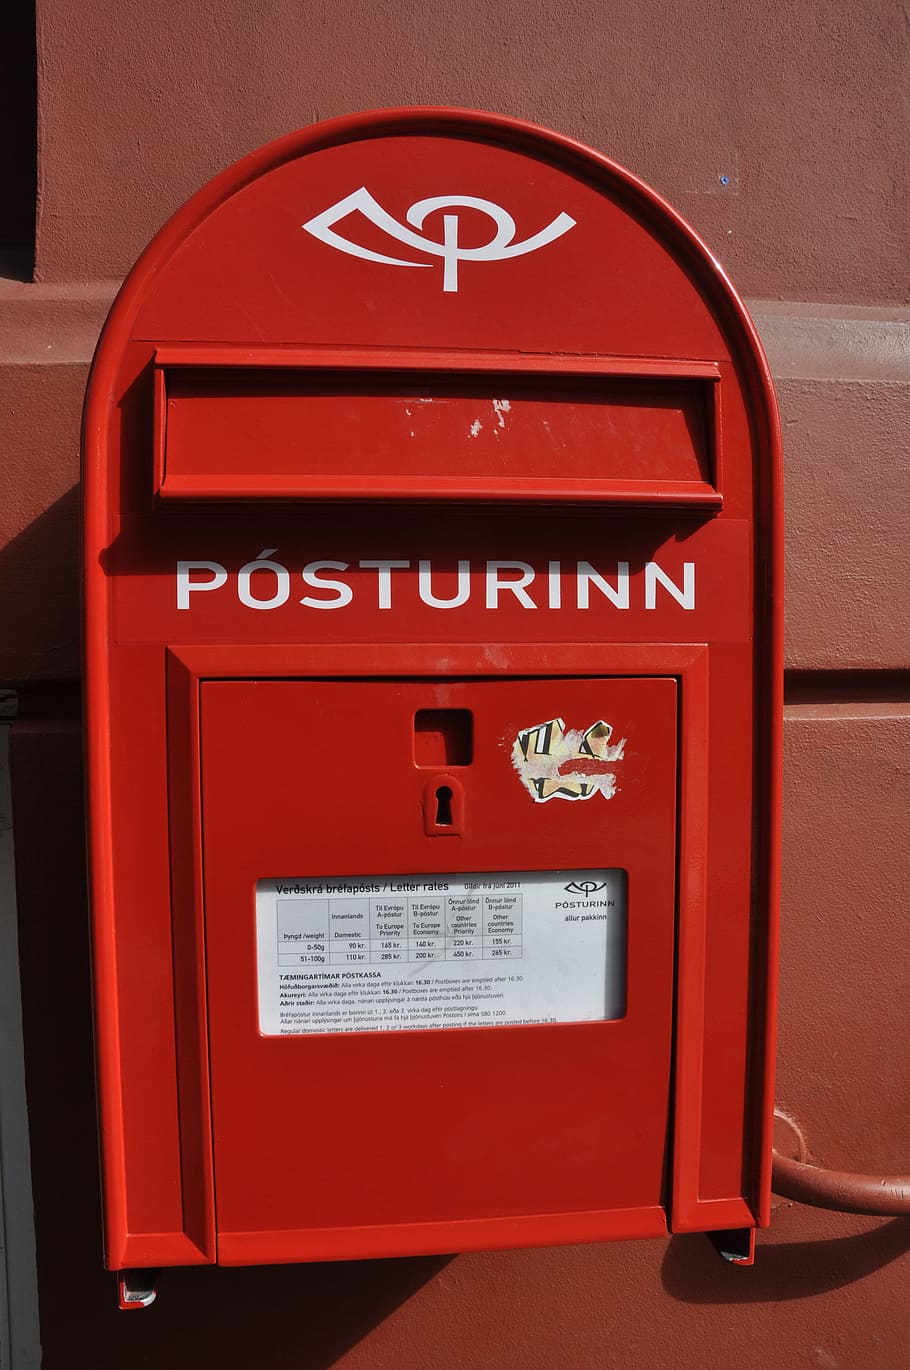 Mailbox, Post, Mail, Postal, communication, delivery, service, postbox, postage, contact